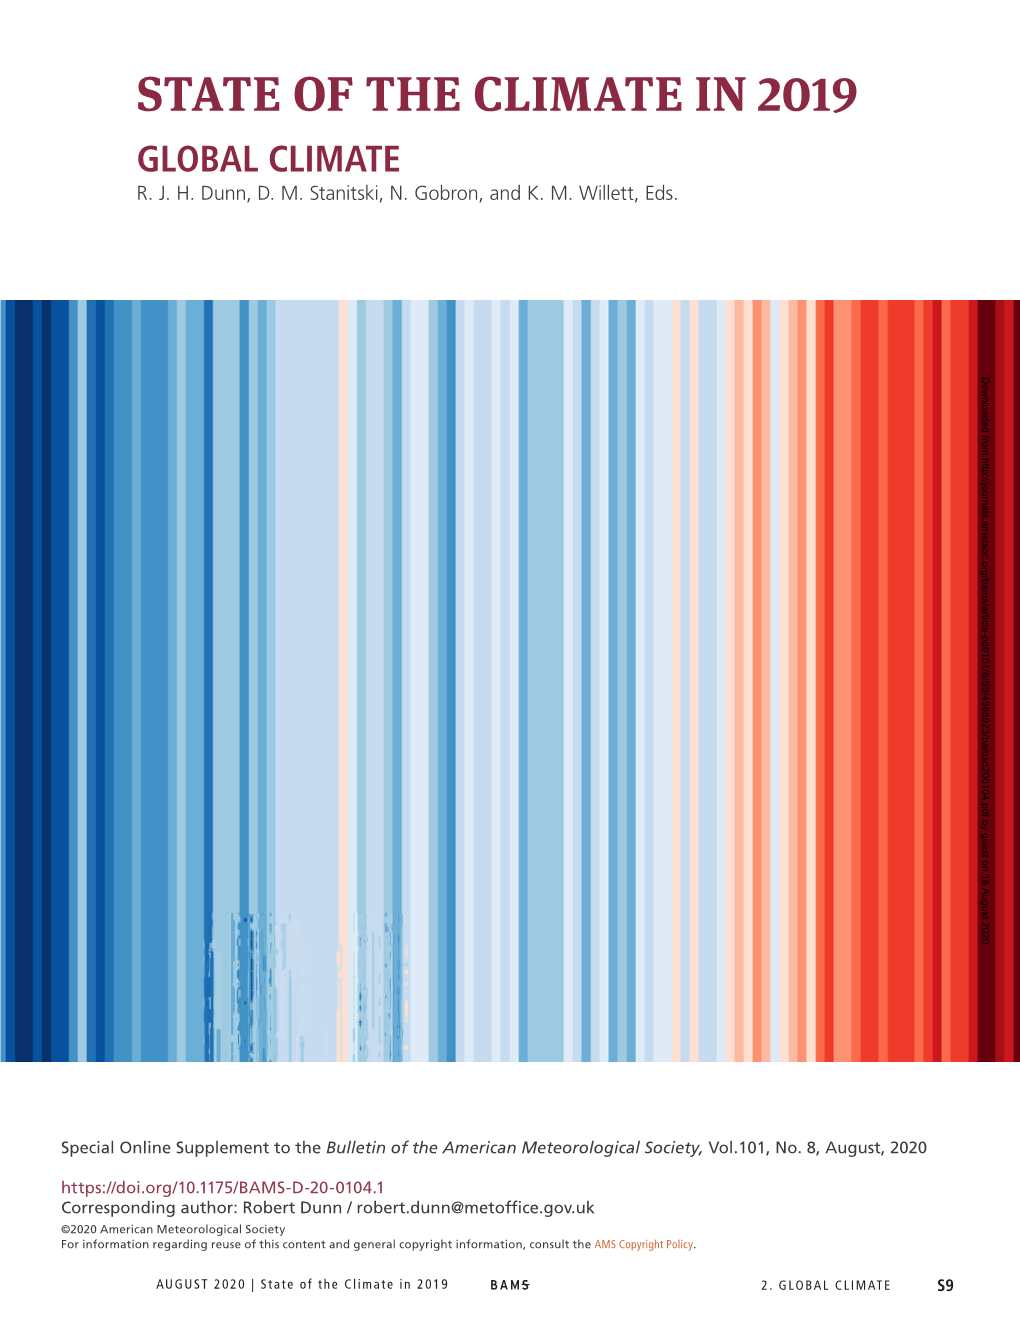 State of the Climate in 2019 Global Climate R